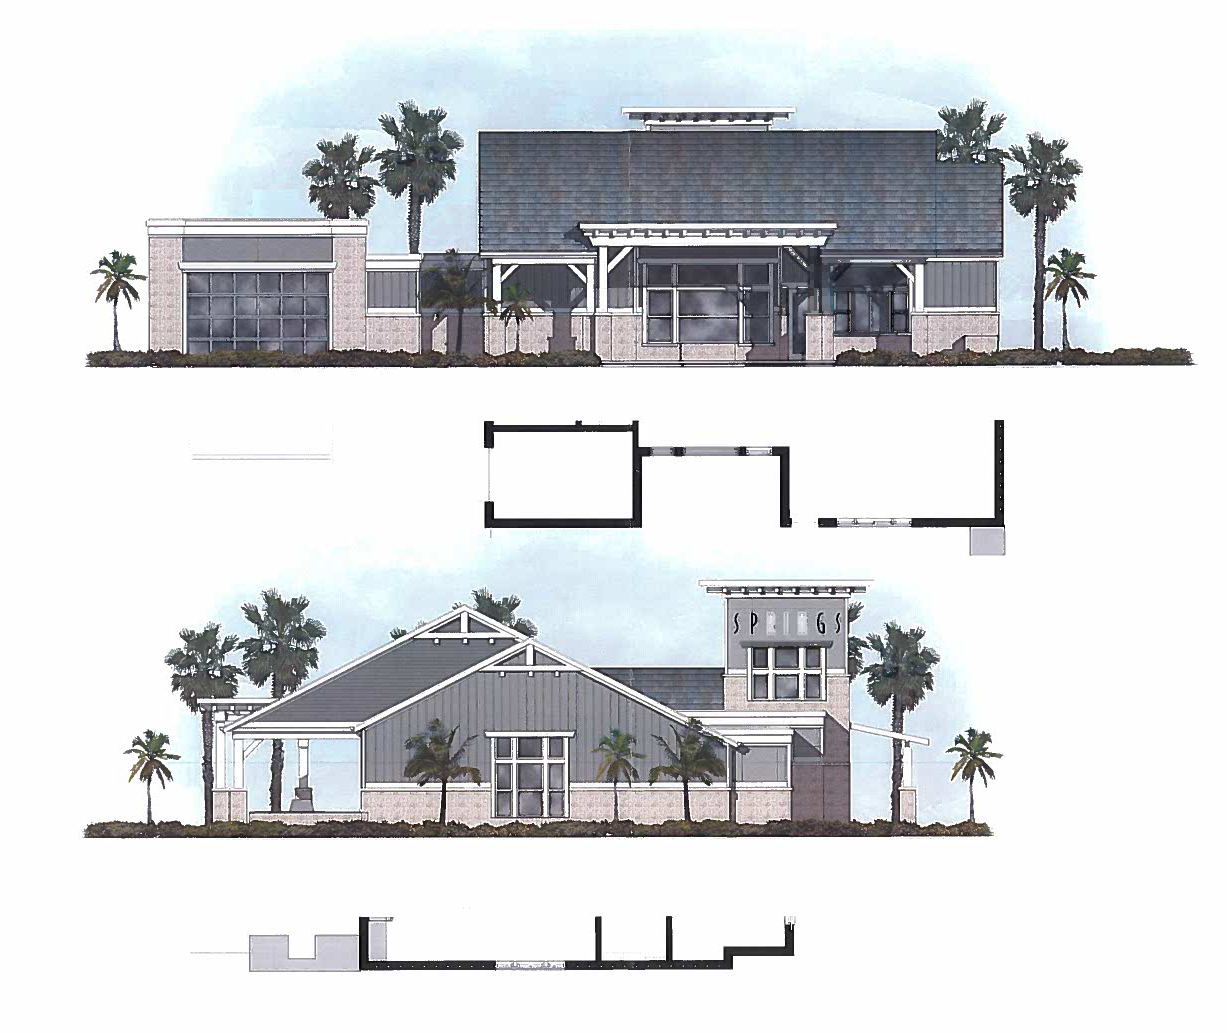 The rear elevation of the Springs at Flagler Center.